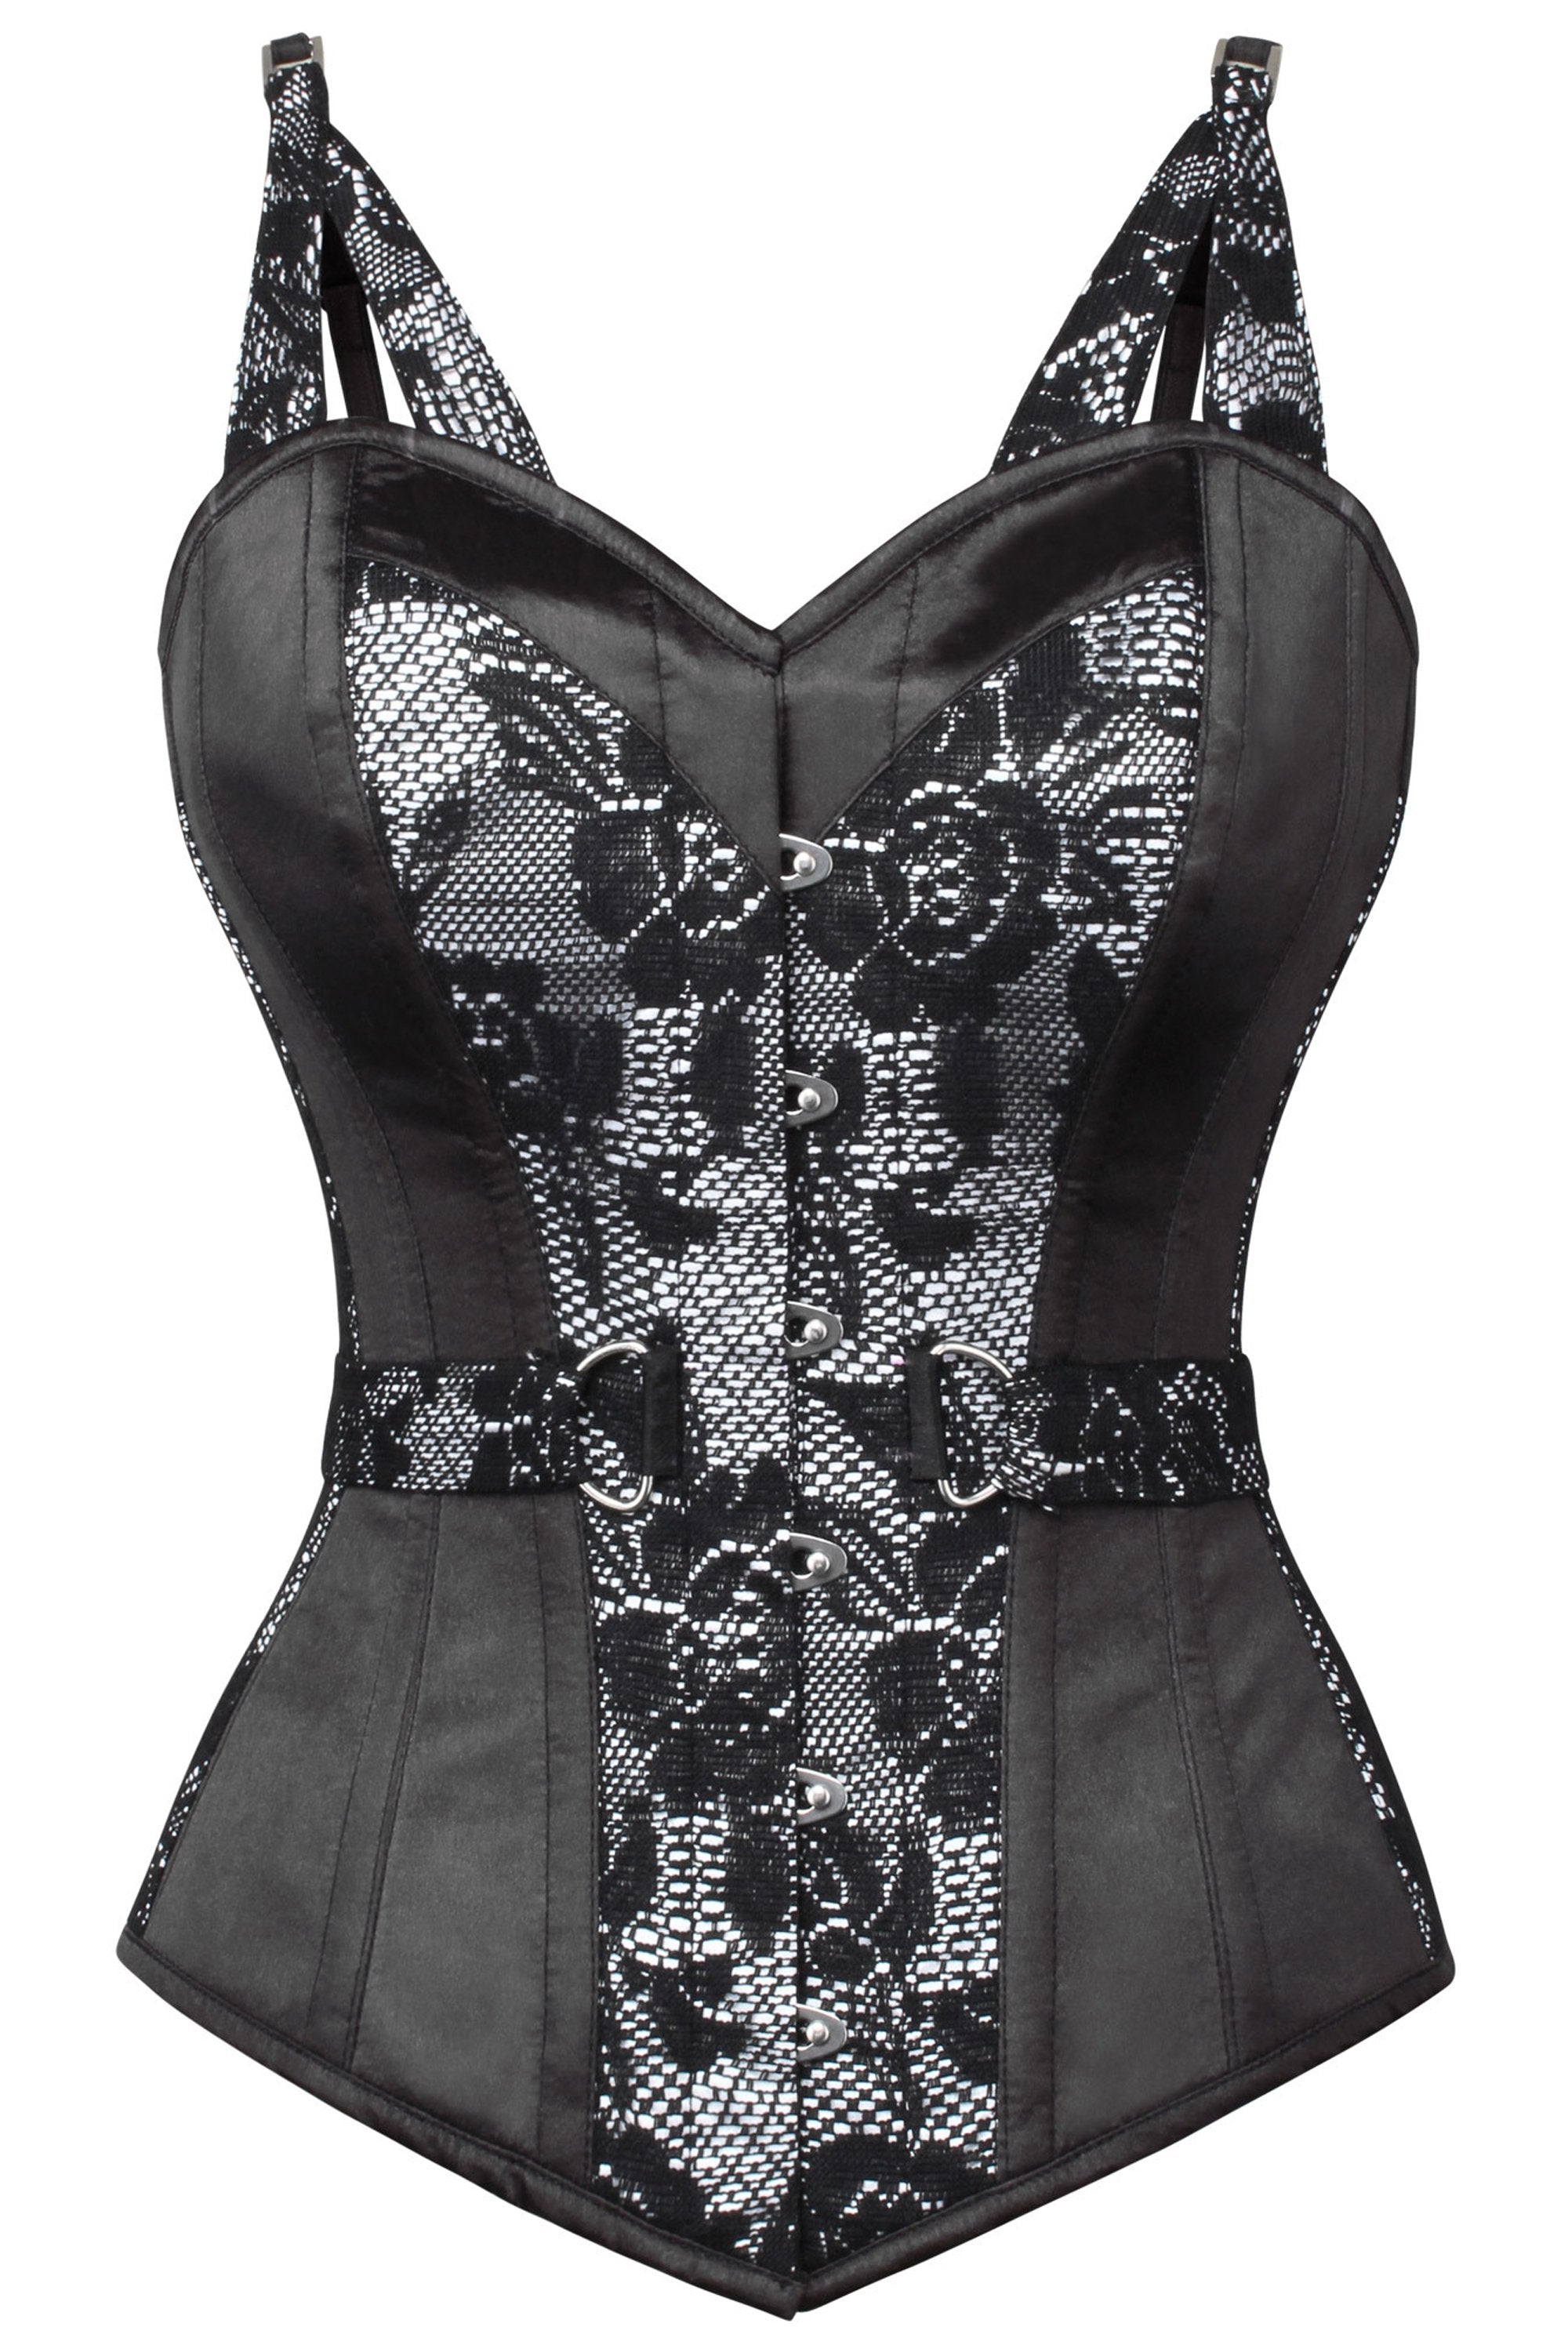 Gothic Inspired Corset Top with Shoulder Straps